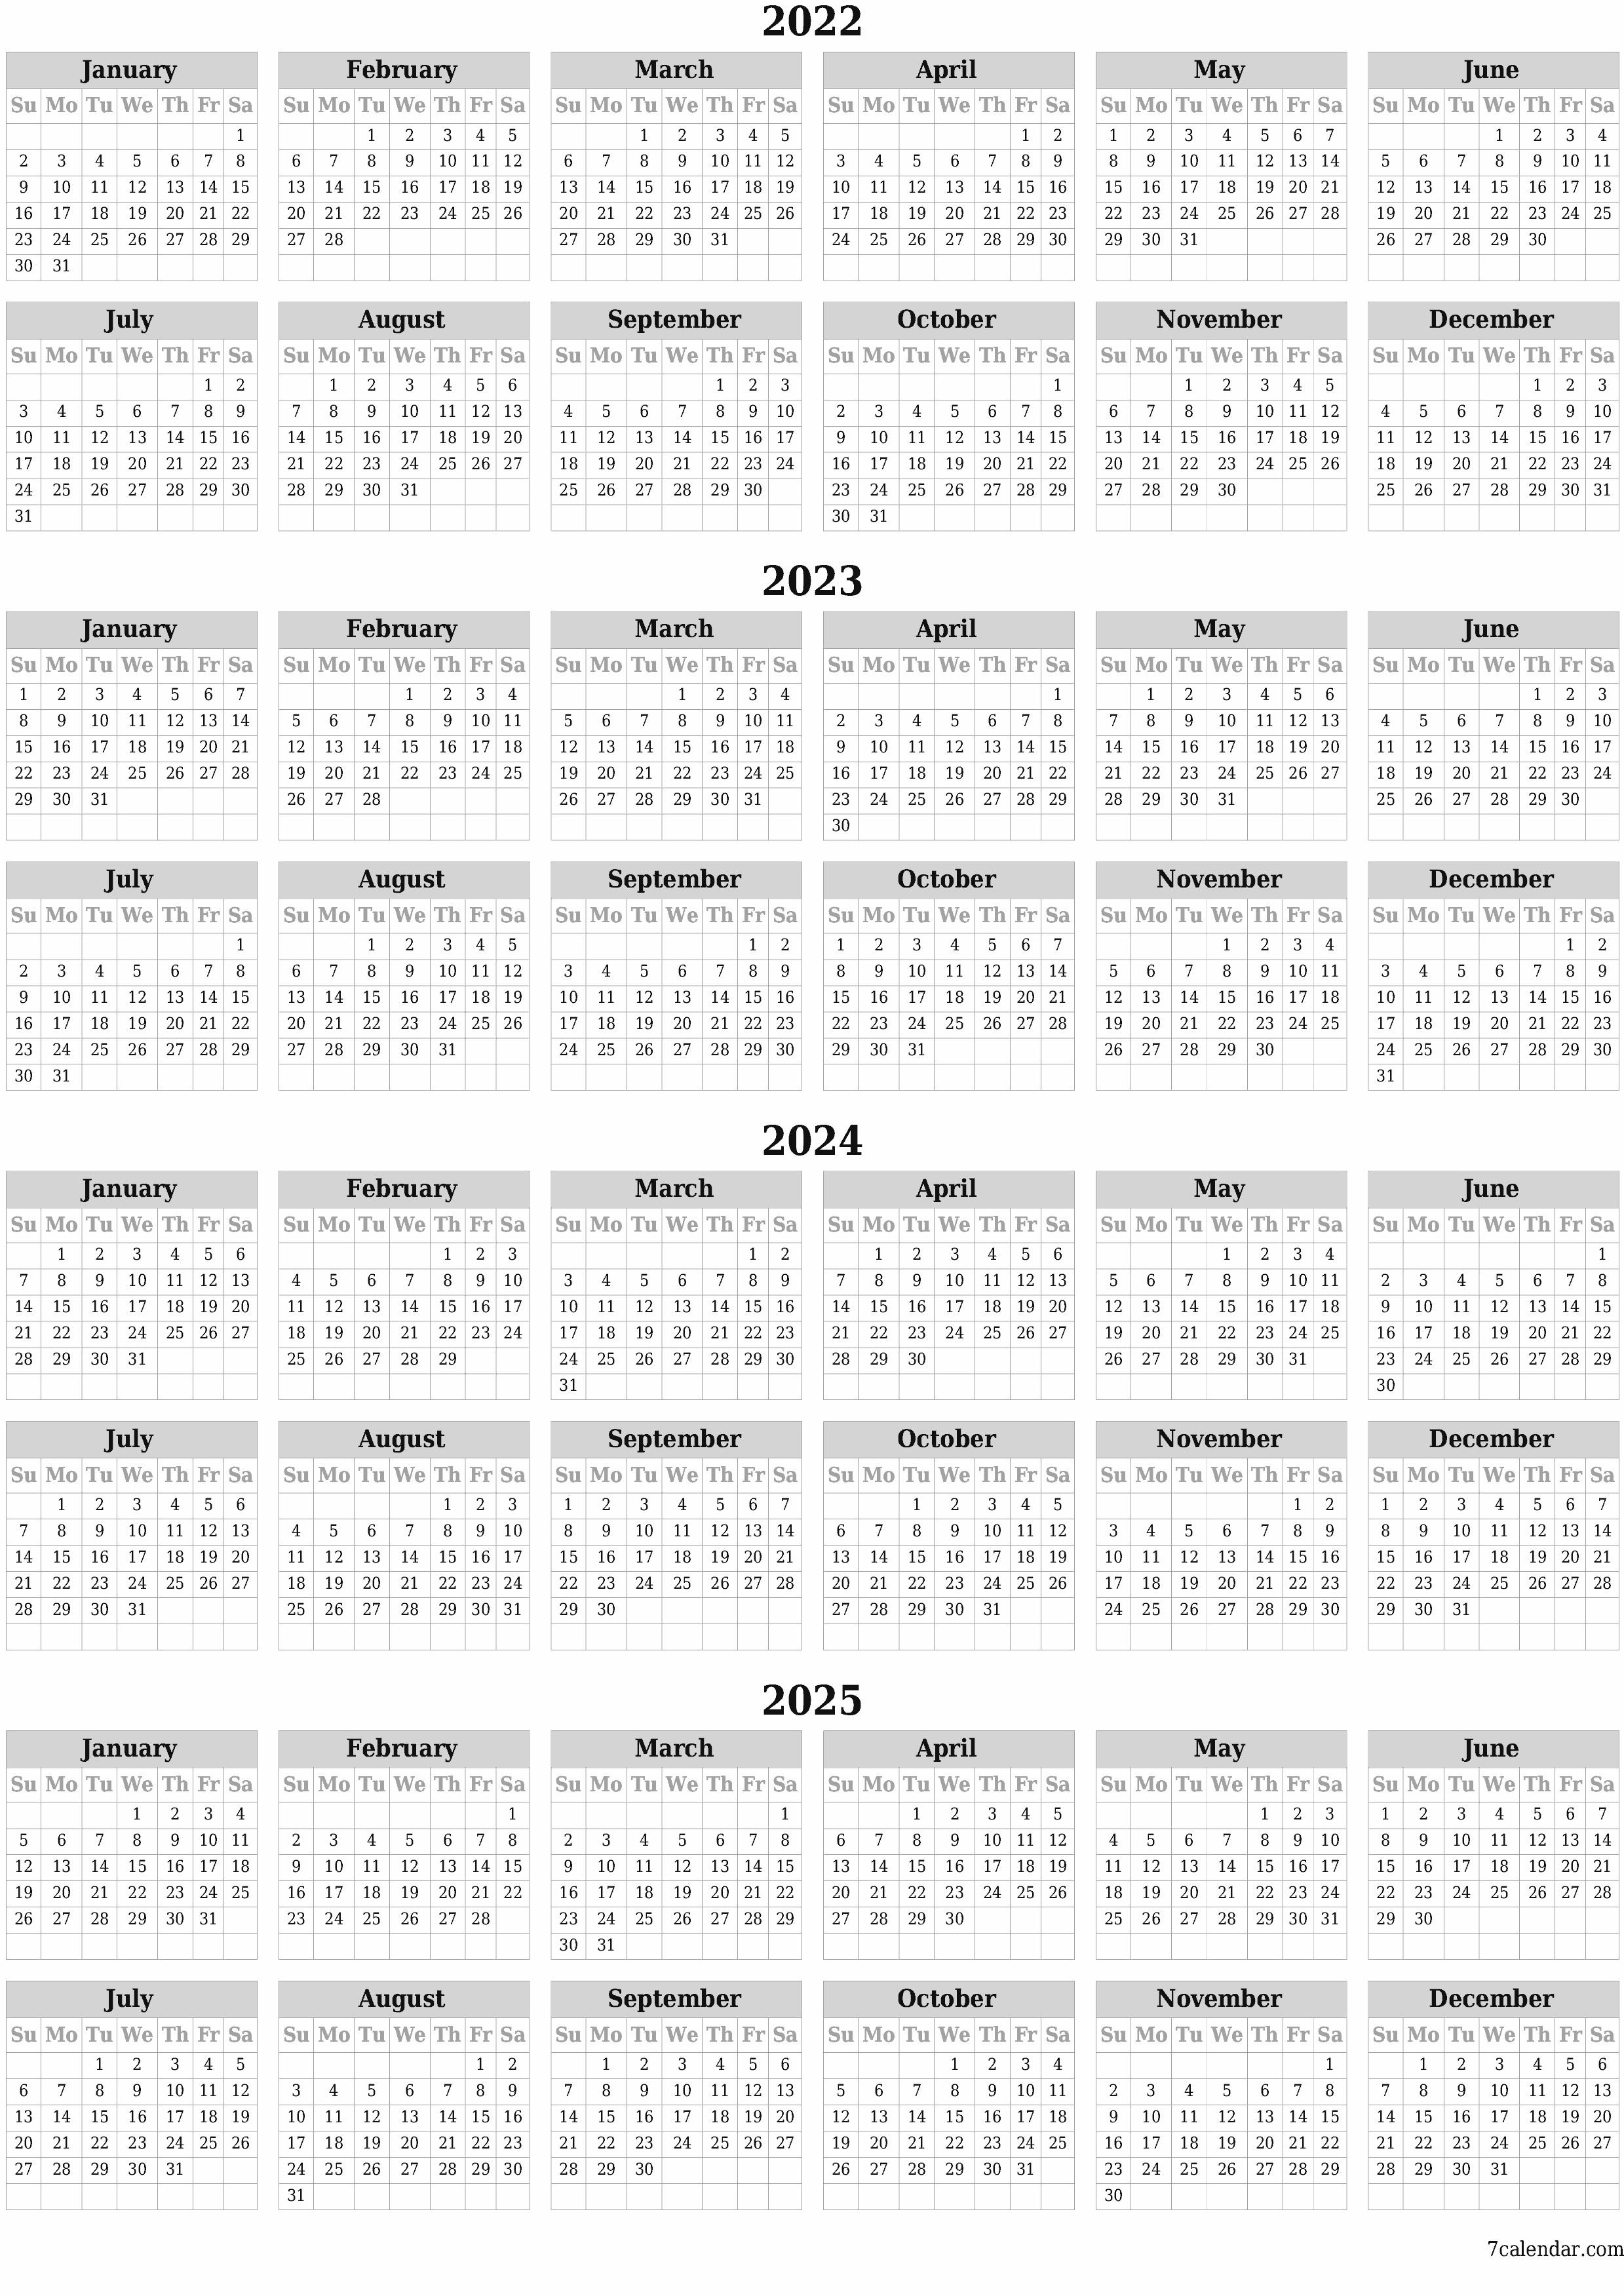 Blank yearly printable calendar and planner for the year 2022, 2023, 2024, 2025 with notes, save and print to PDF PNG English - 7calendar.com